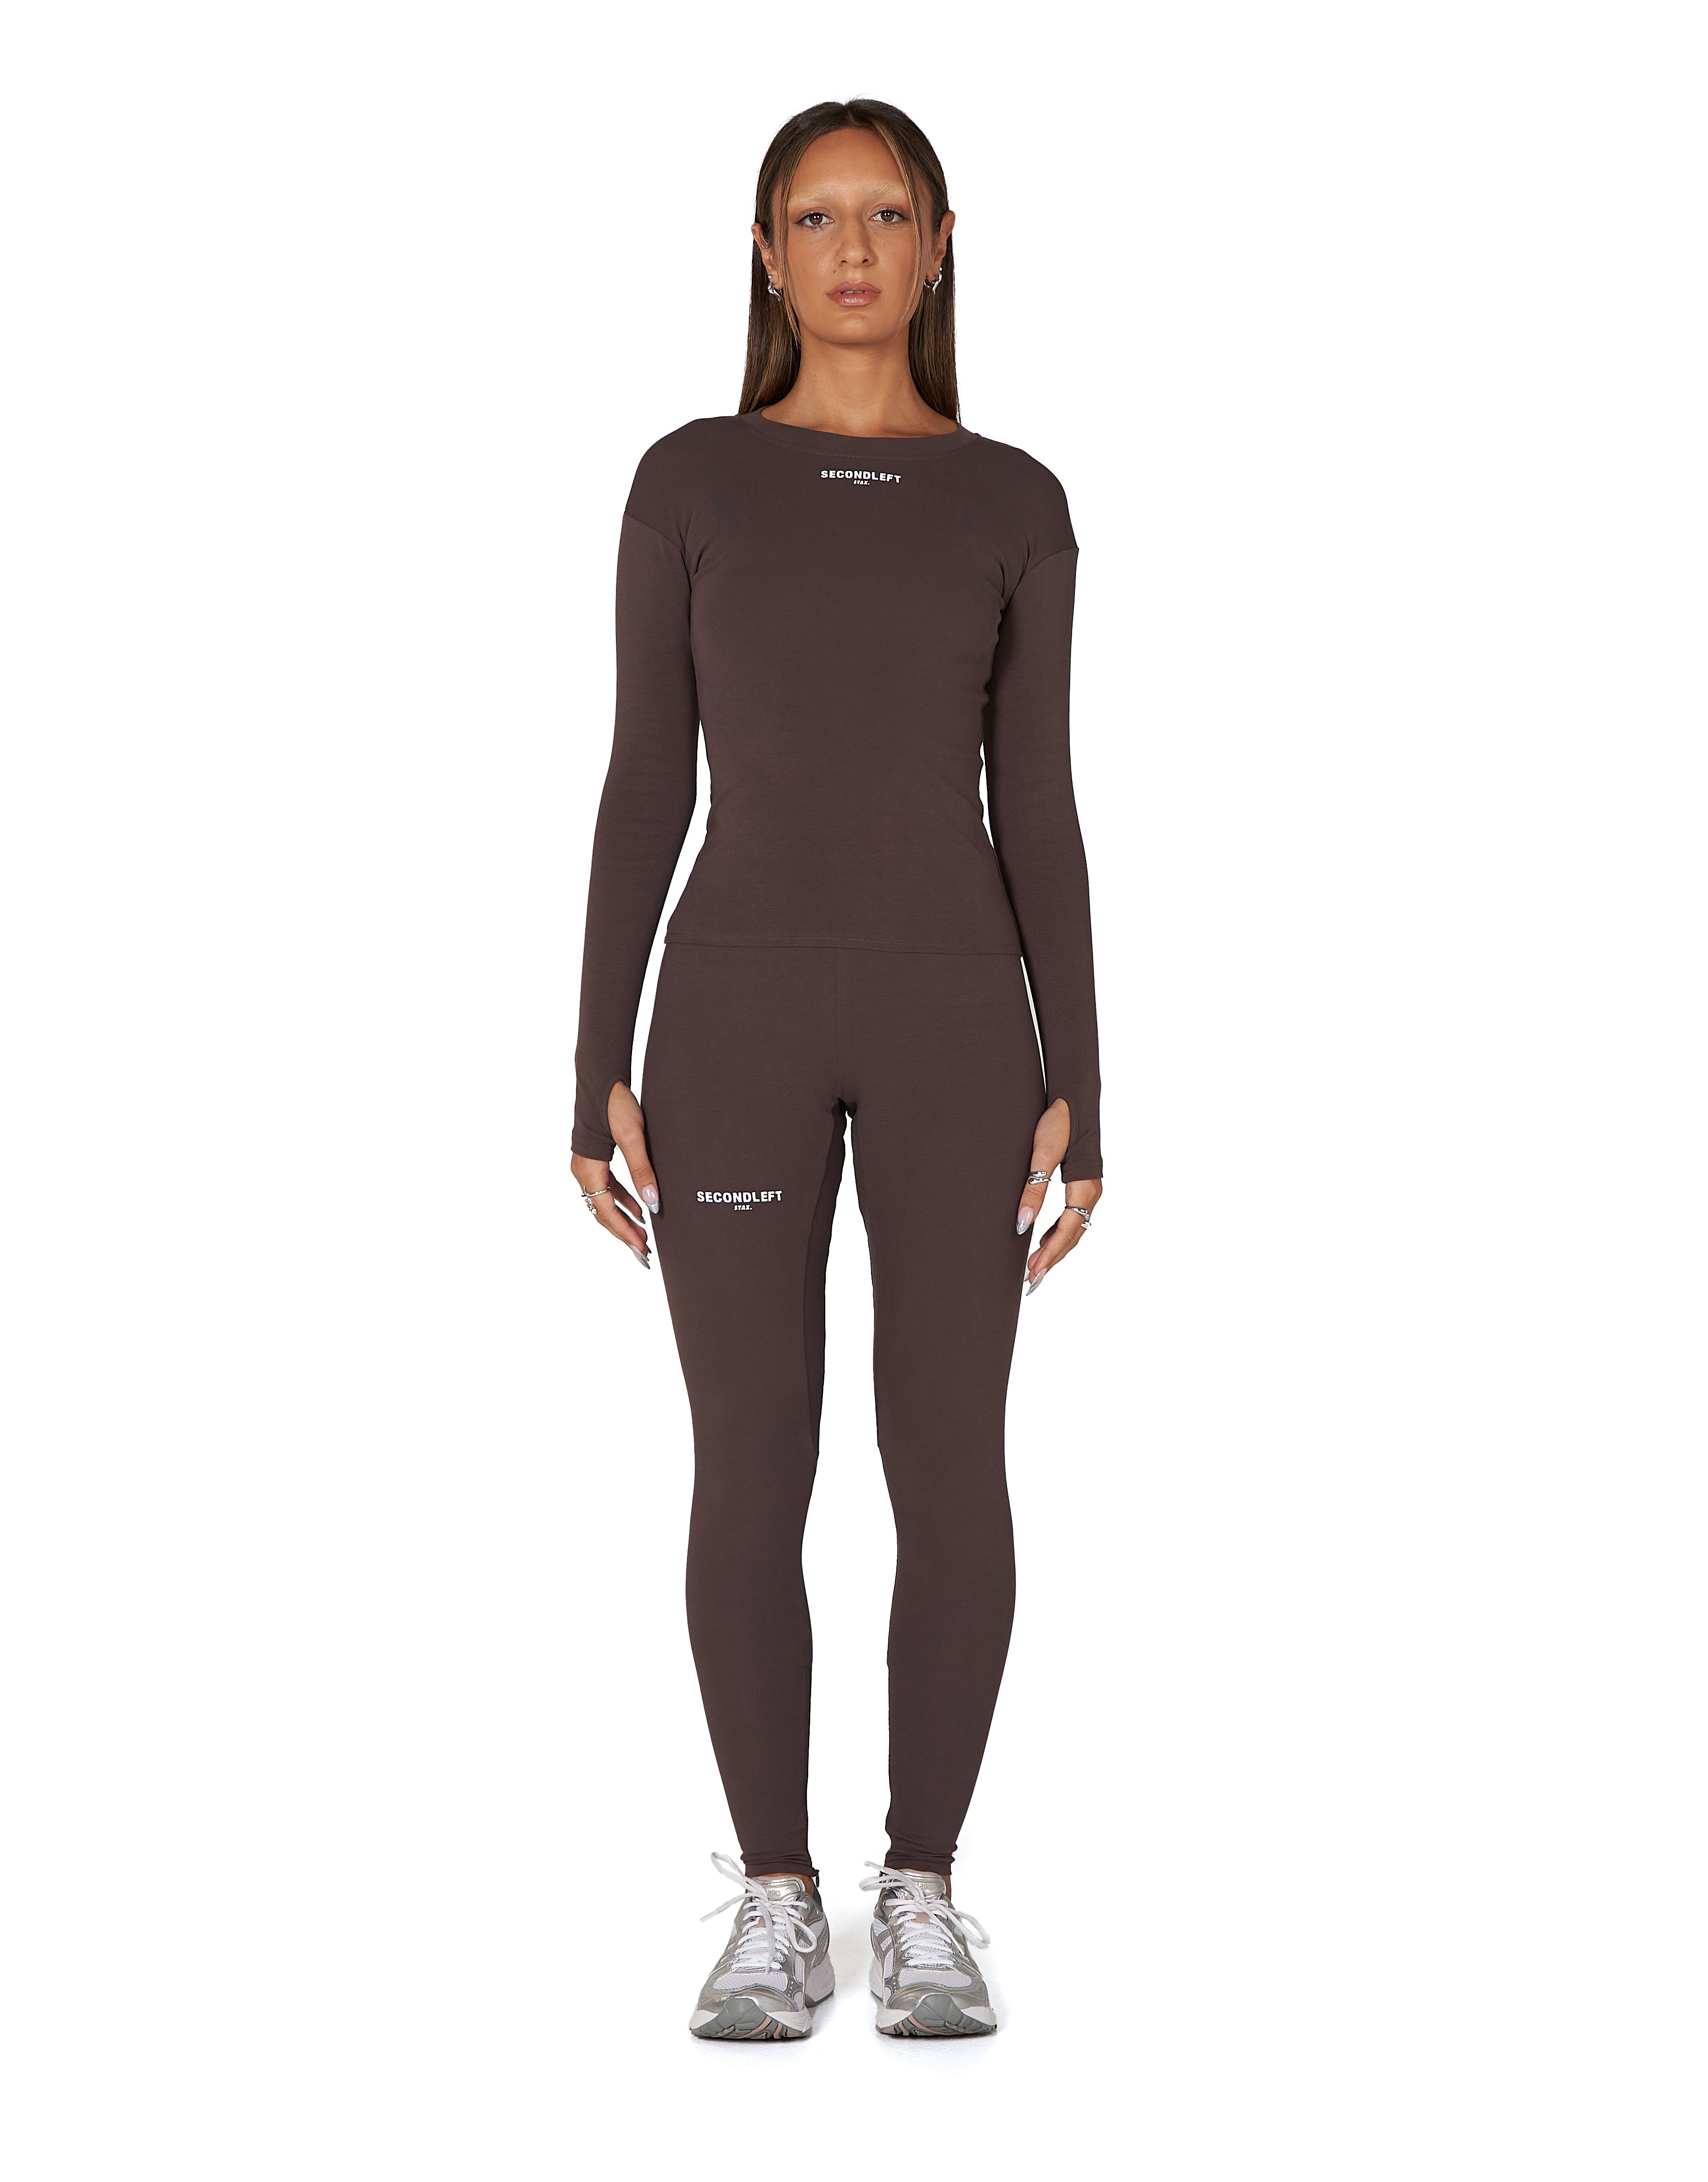 stax-sl-bw-long-sleeve-sable-brown